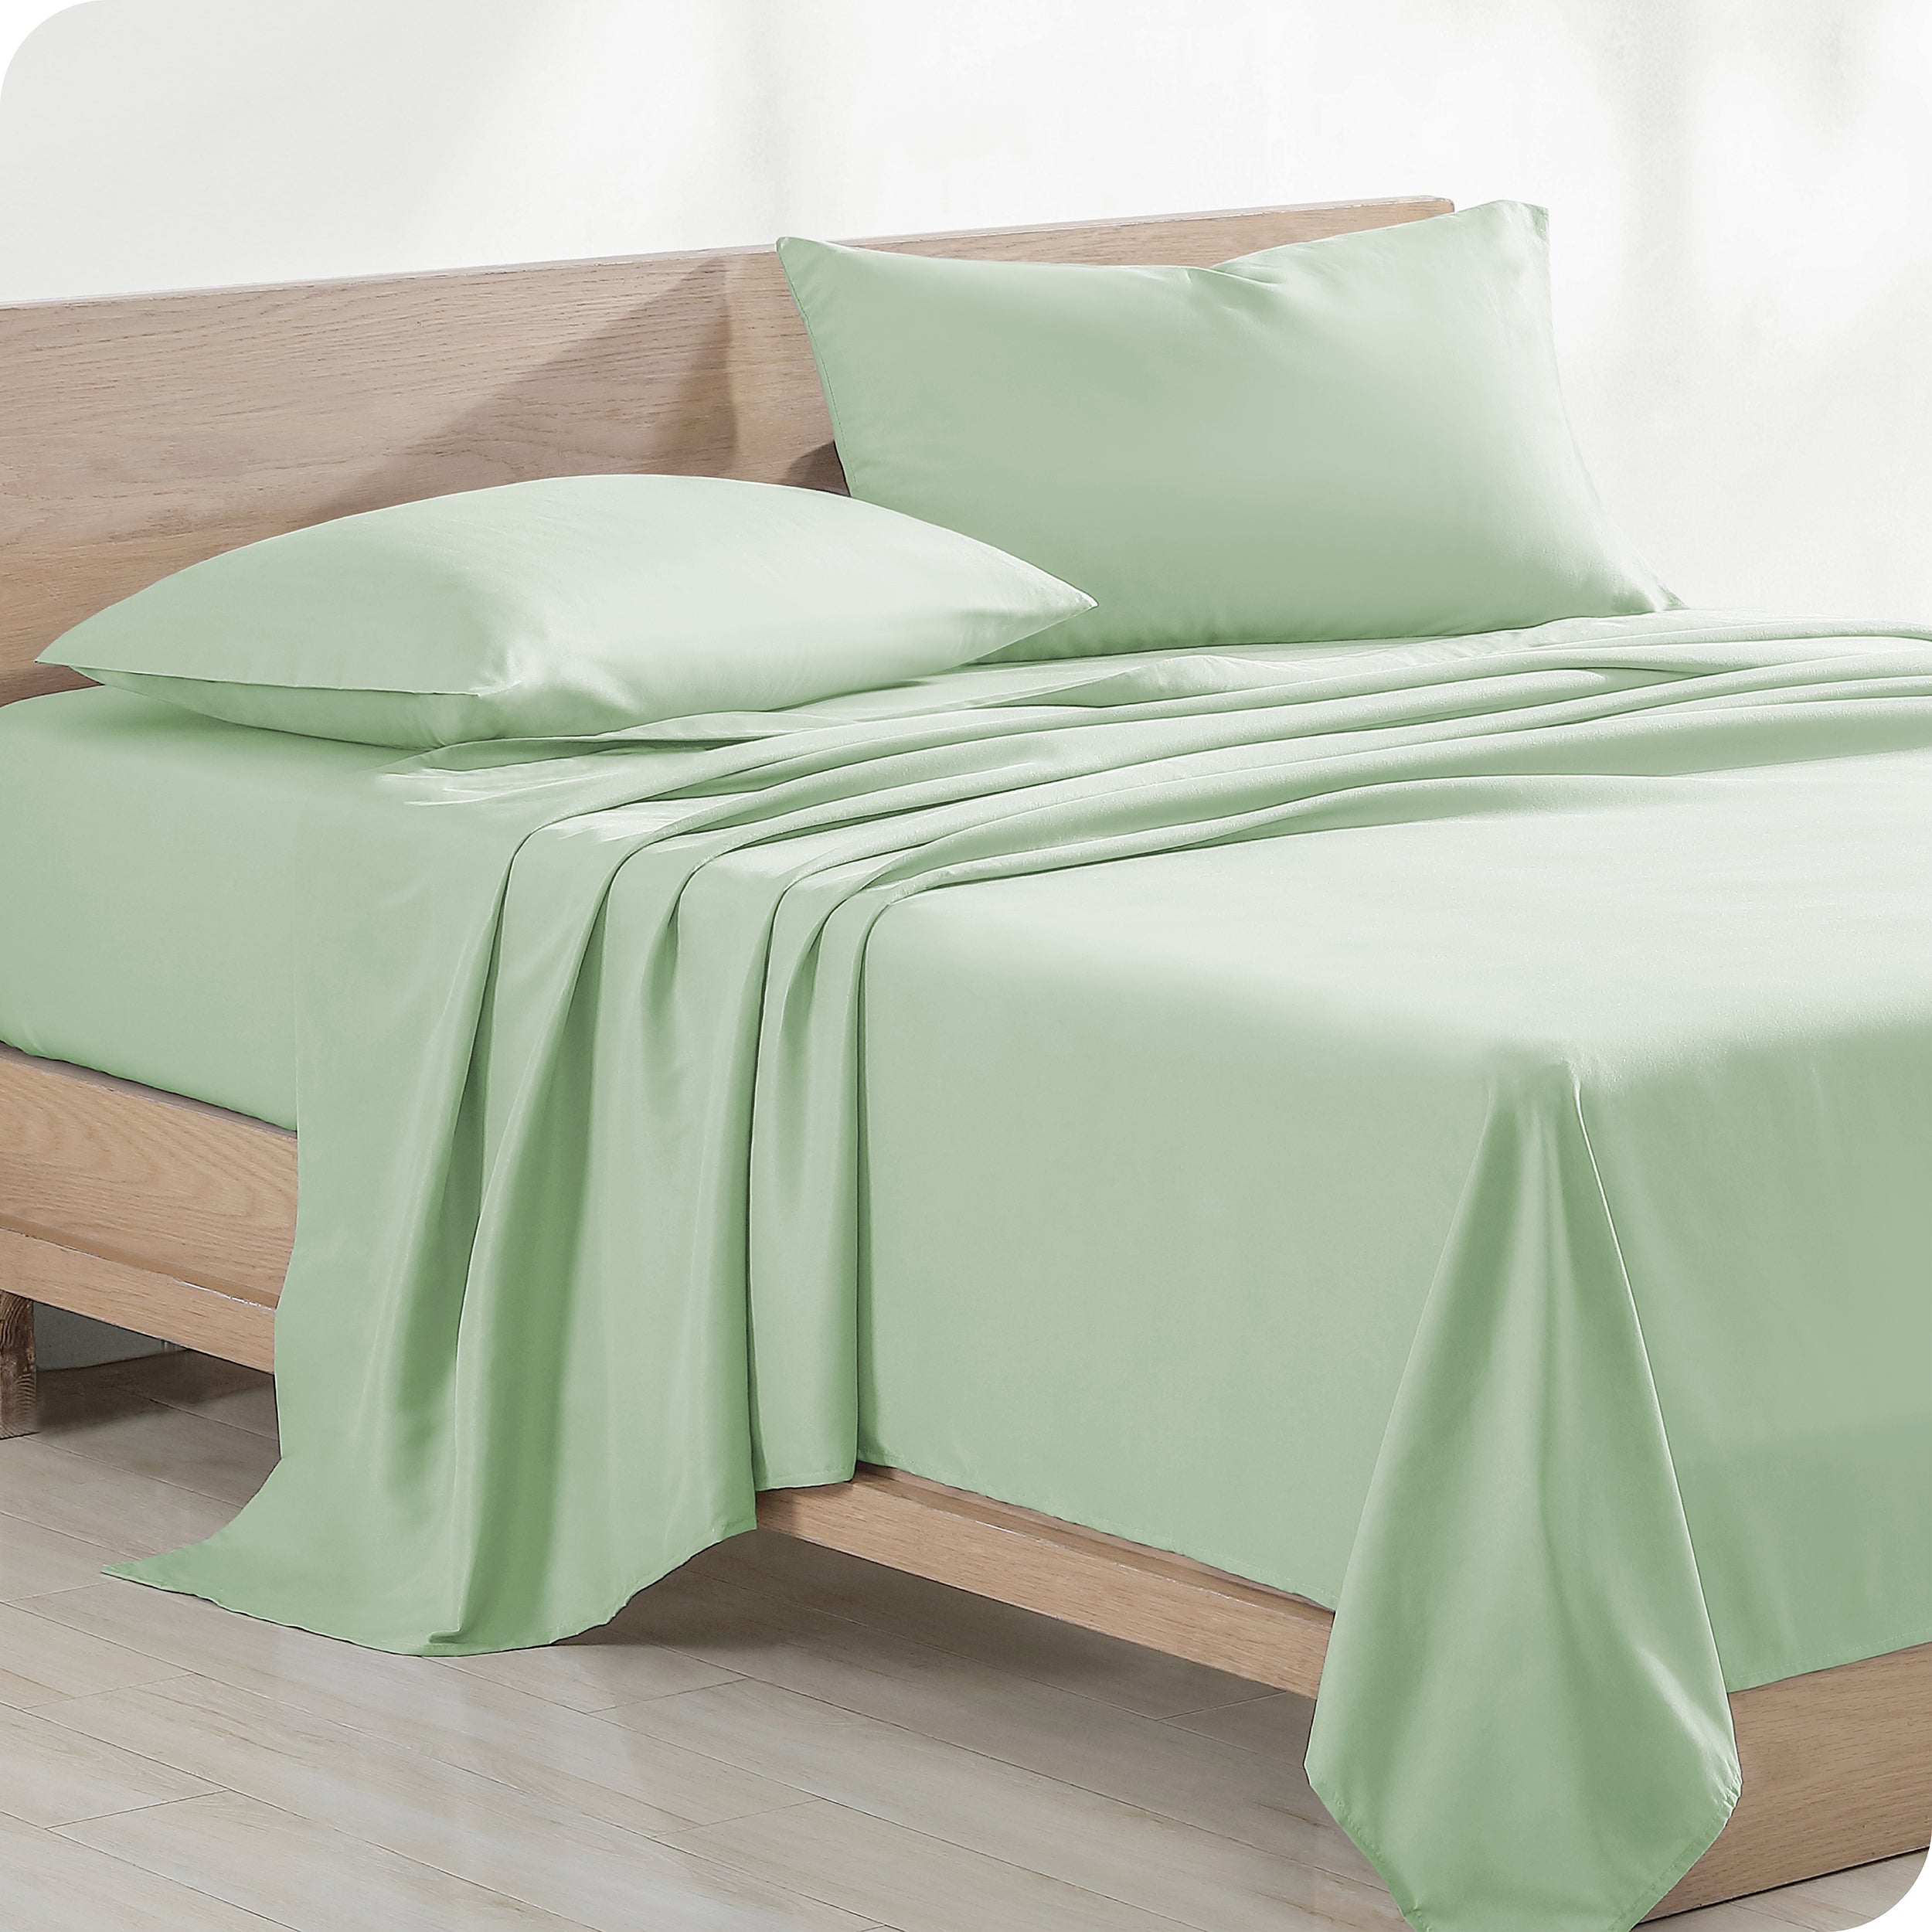 Diagonal view of modern wood bed with sheets and pillows